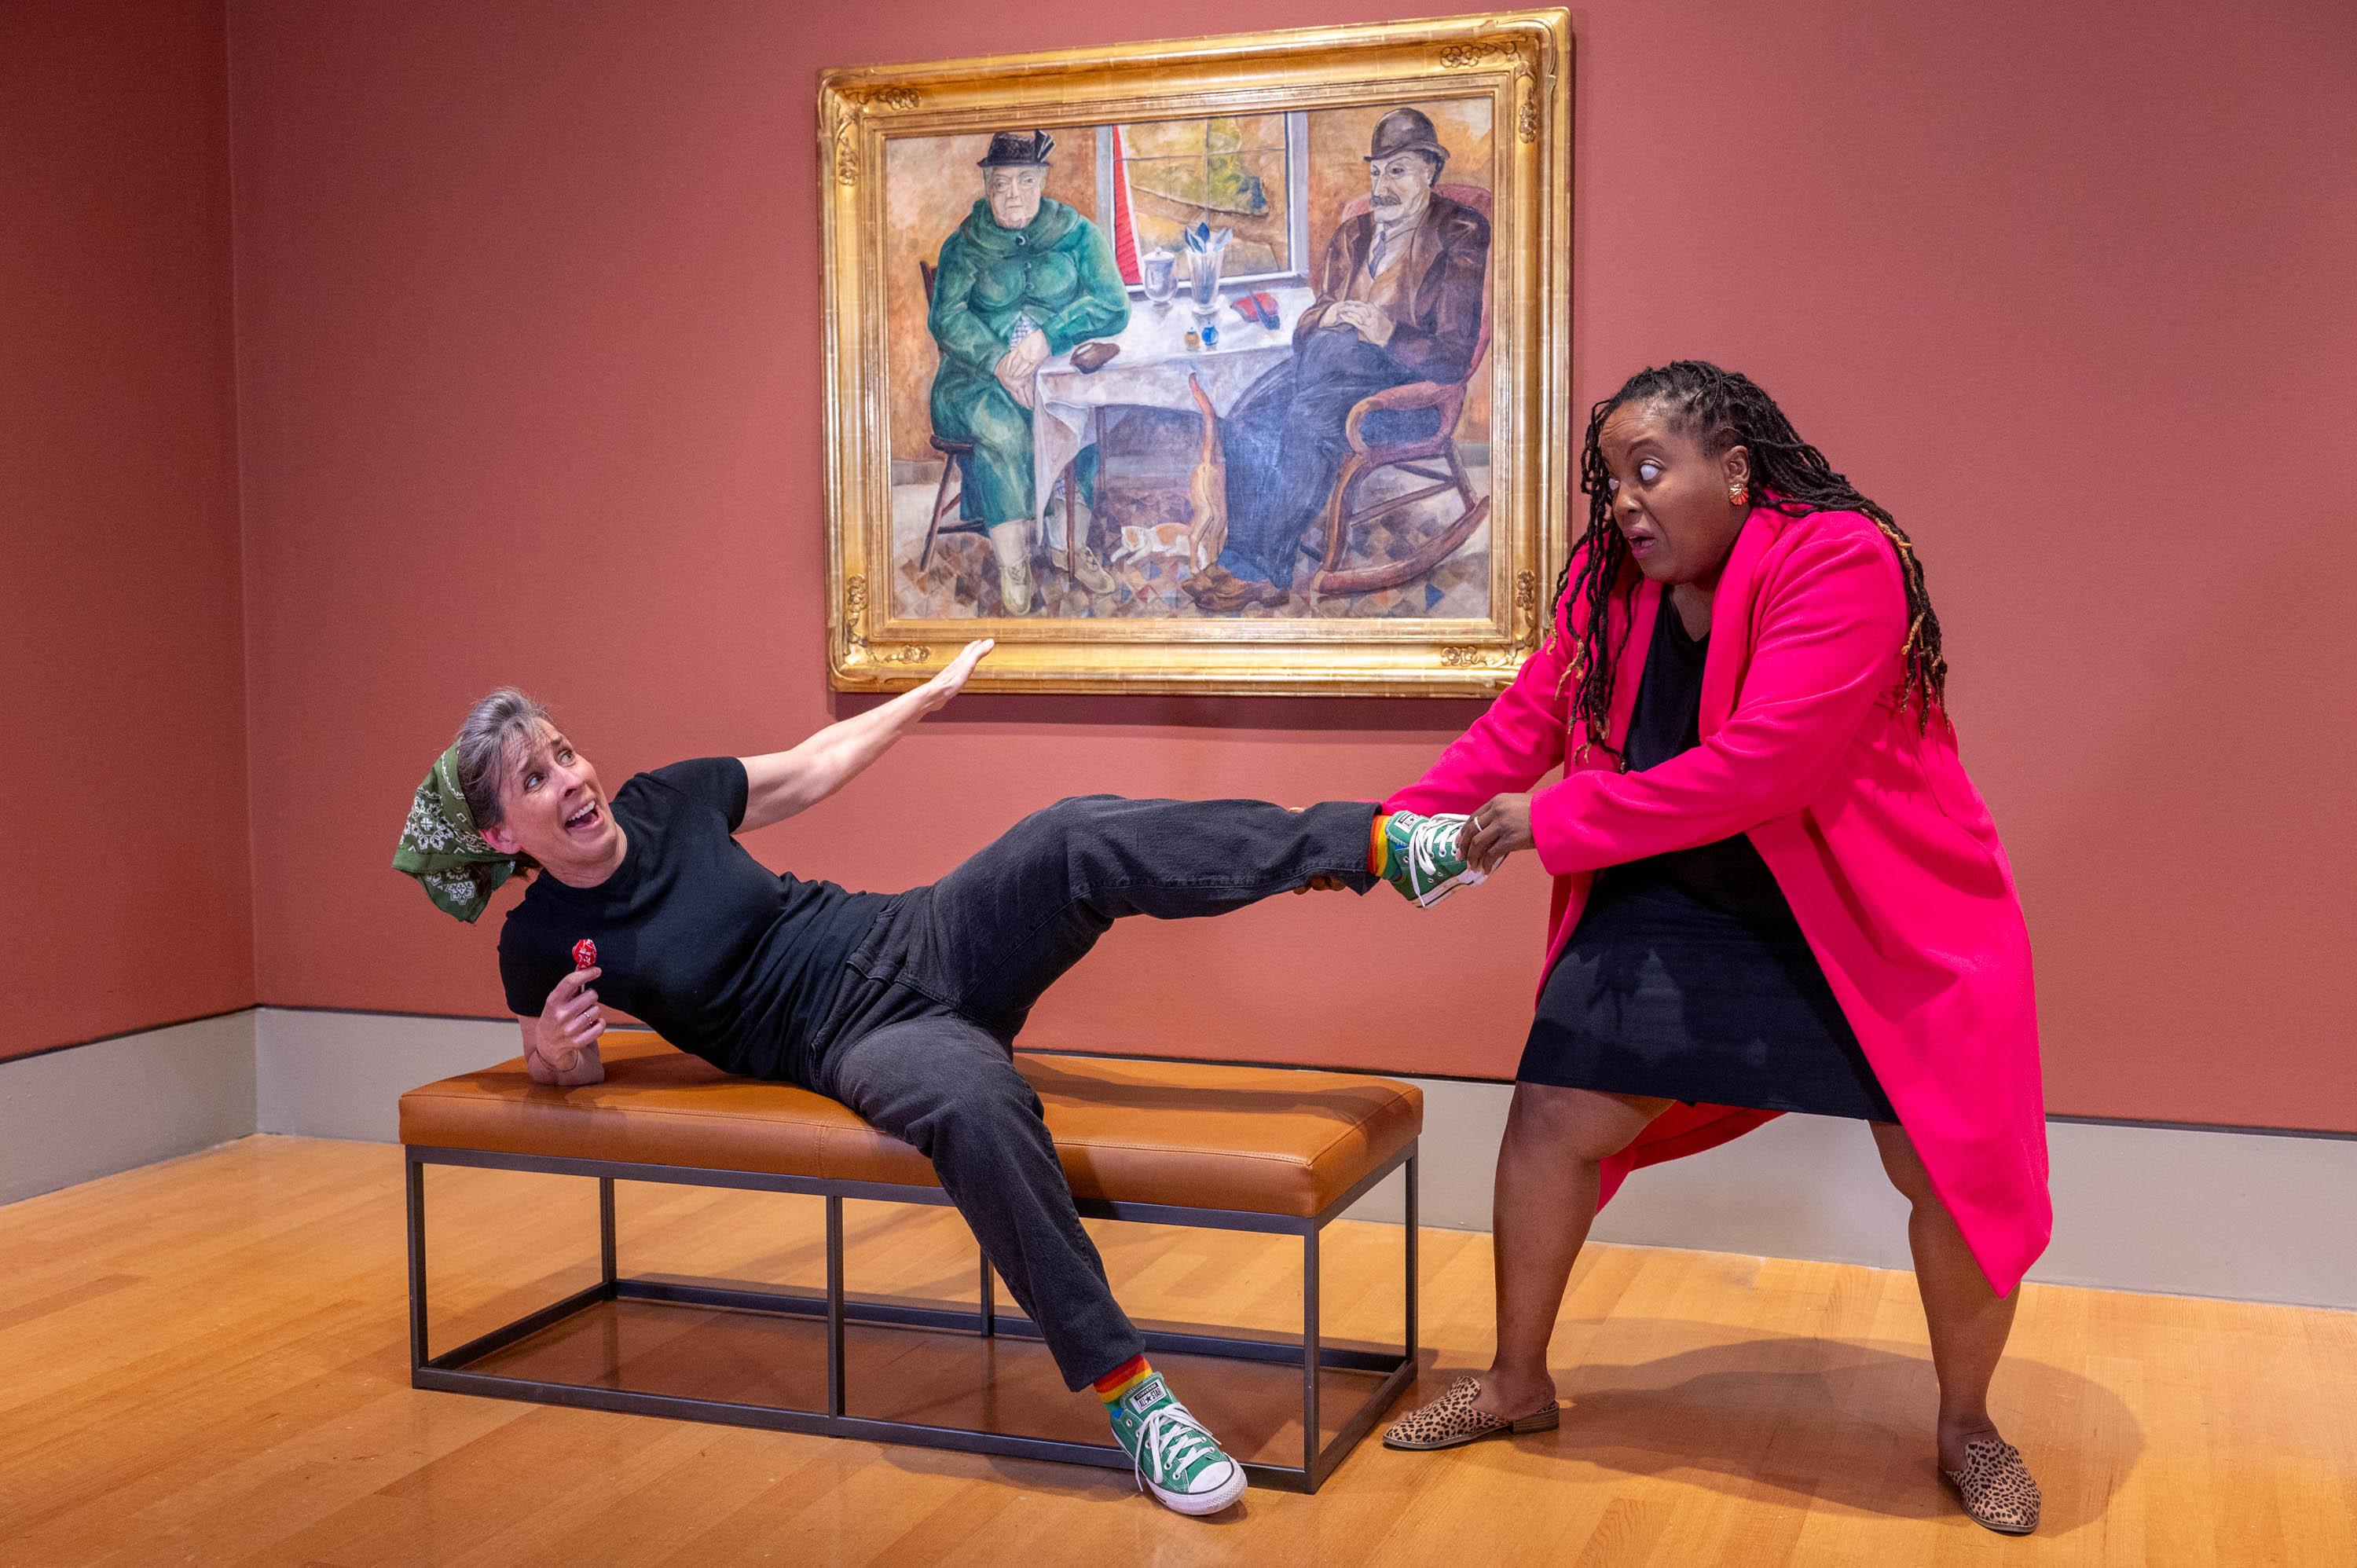 Two actors are in the galleries. One lies on a bench while the other pulls her by her foot